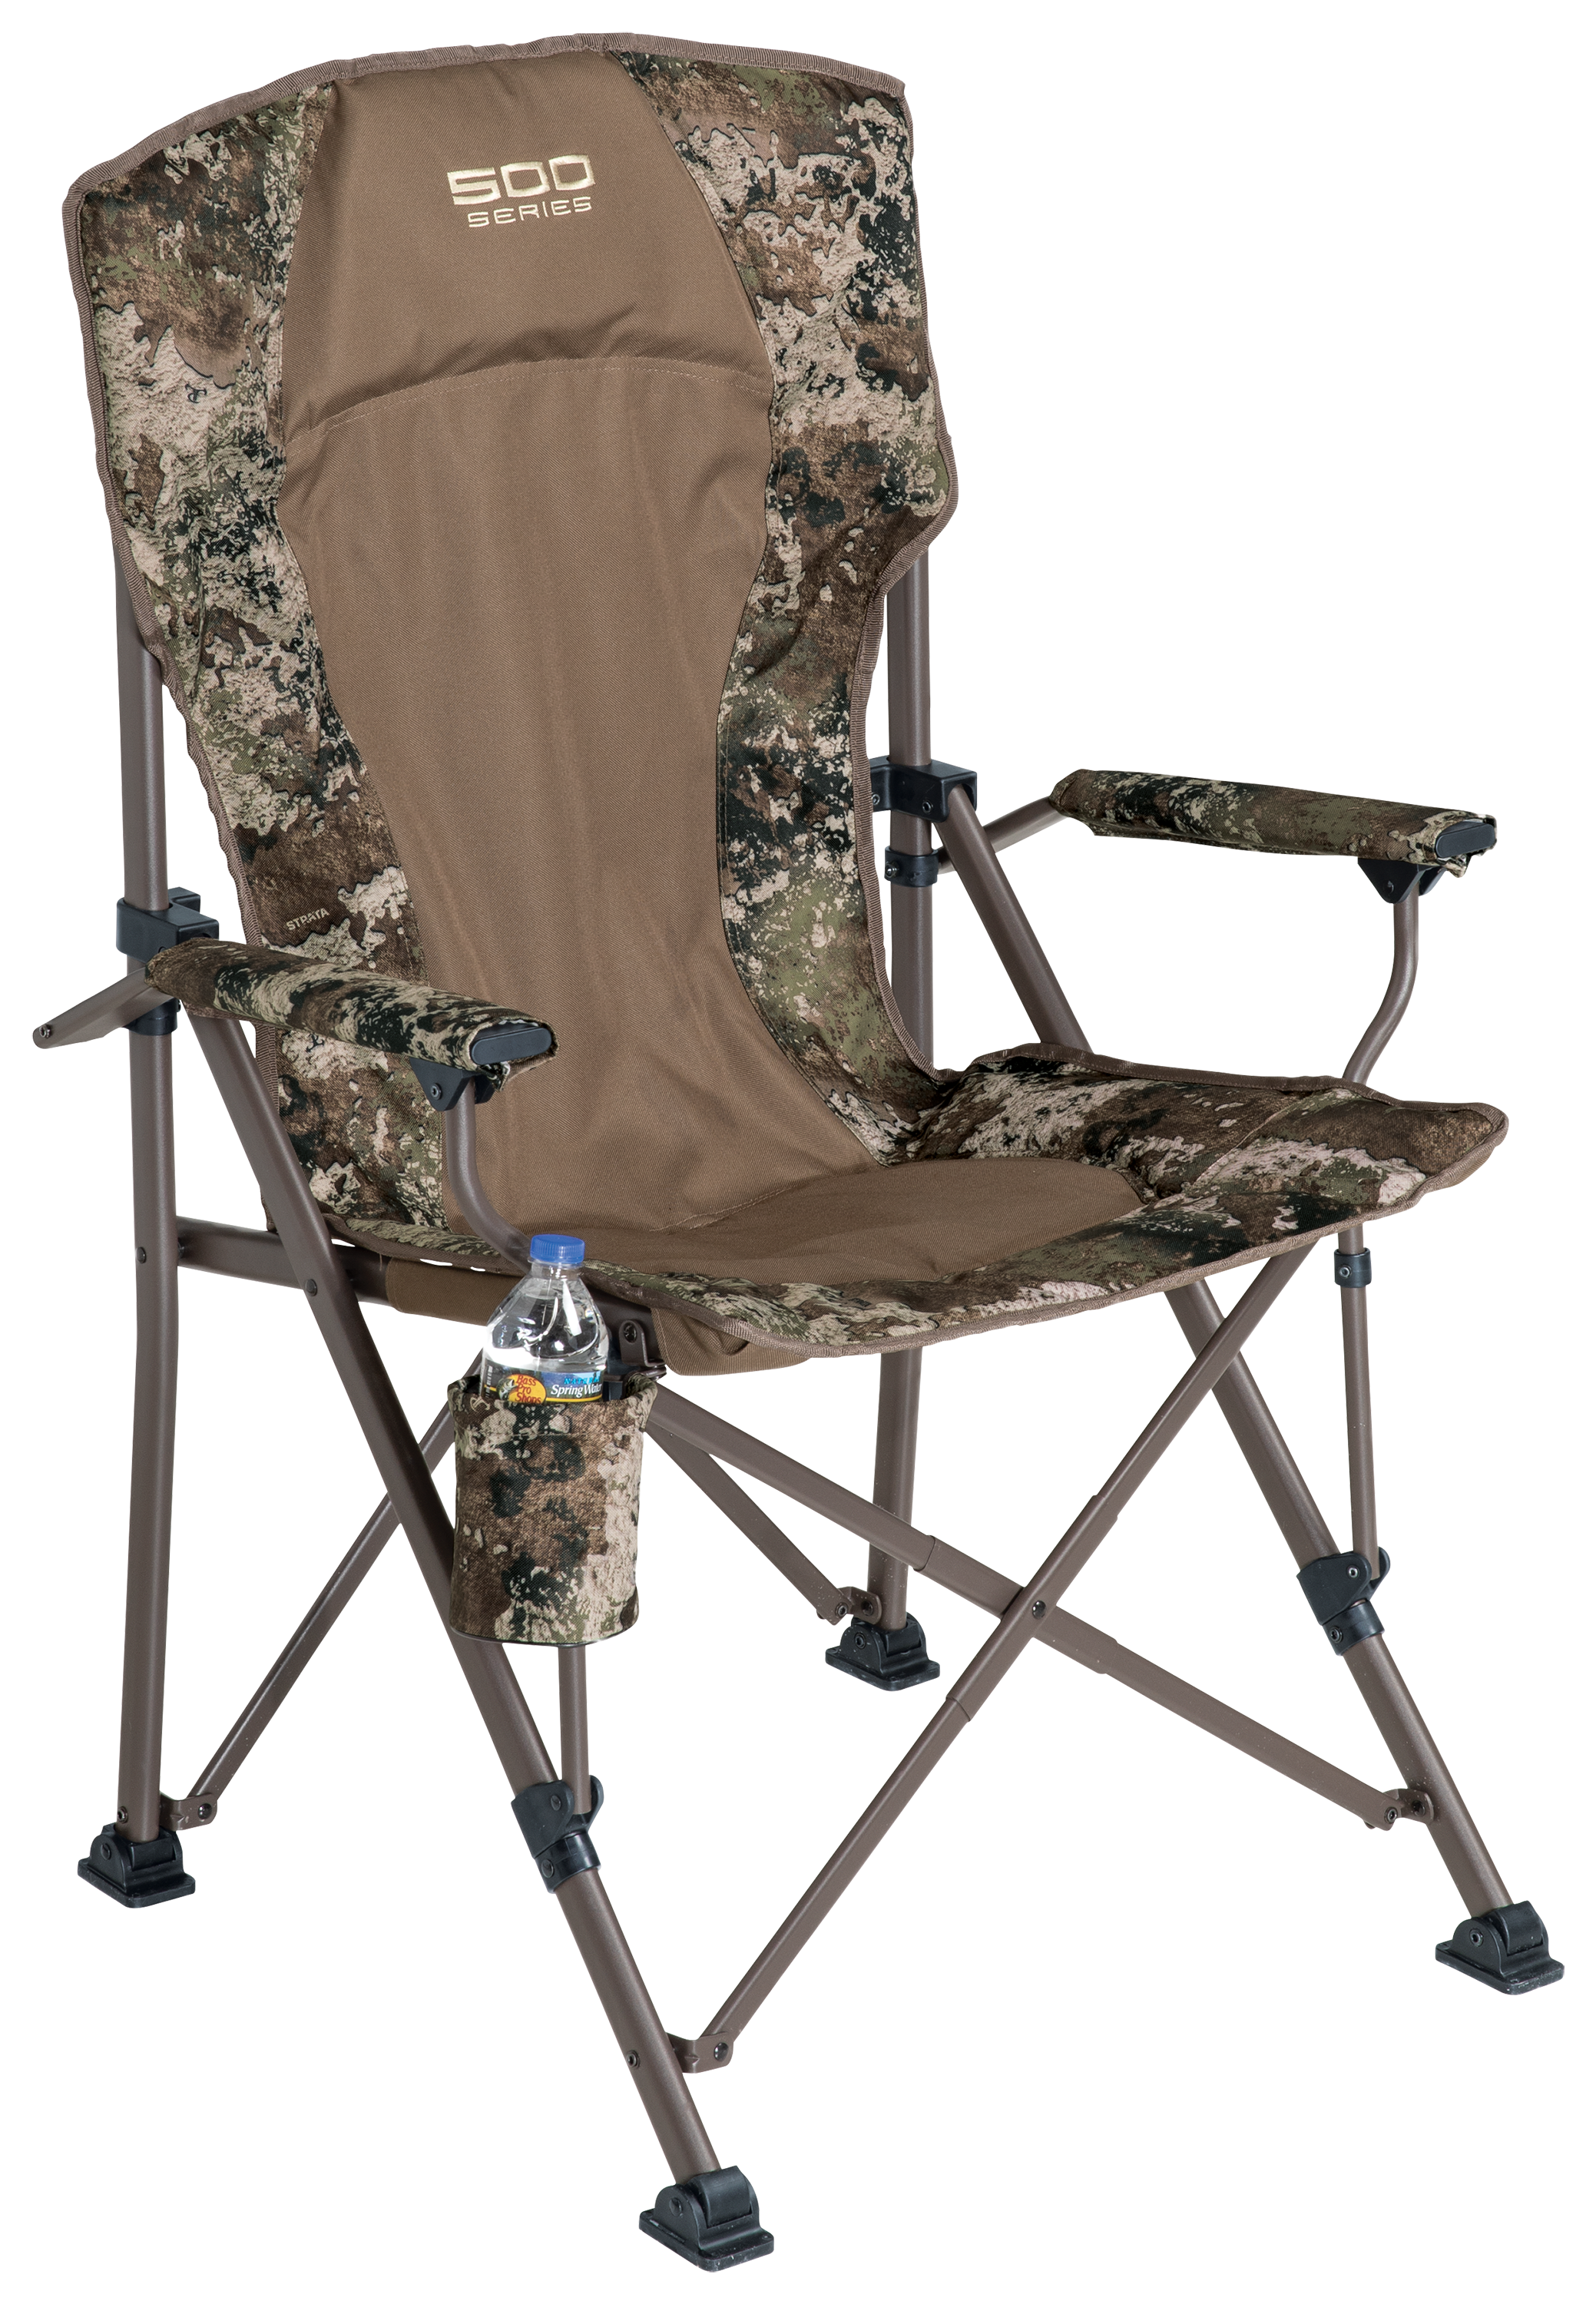 Cabela's 500 Series TrueTimber Strata Deluxe Folding Hunting Chair